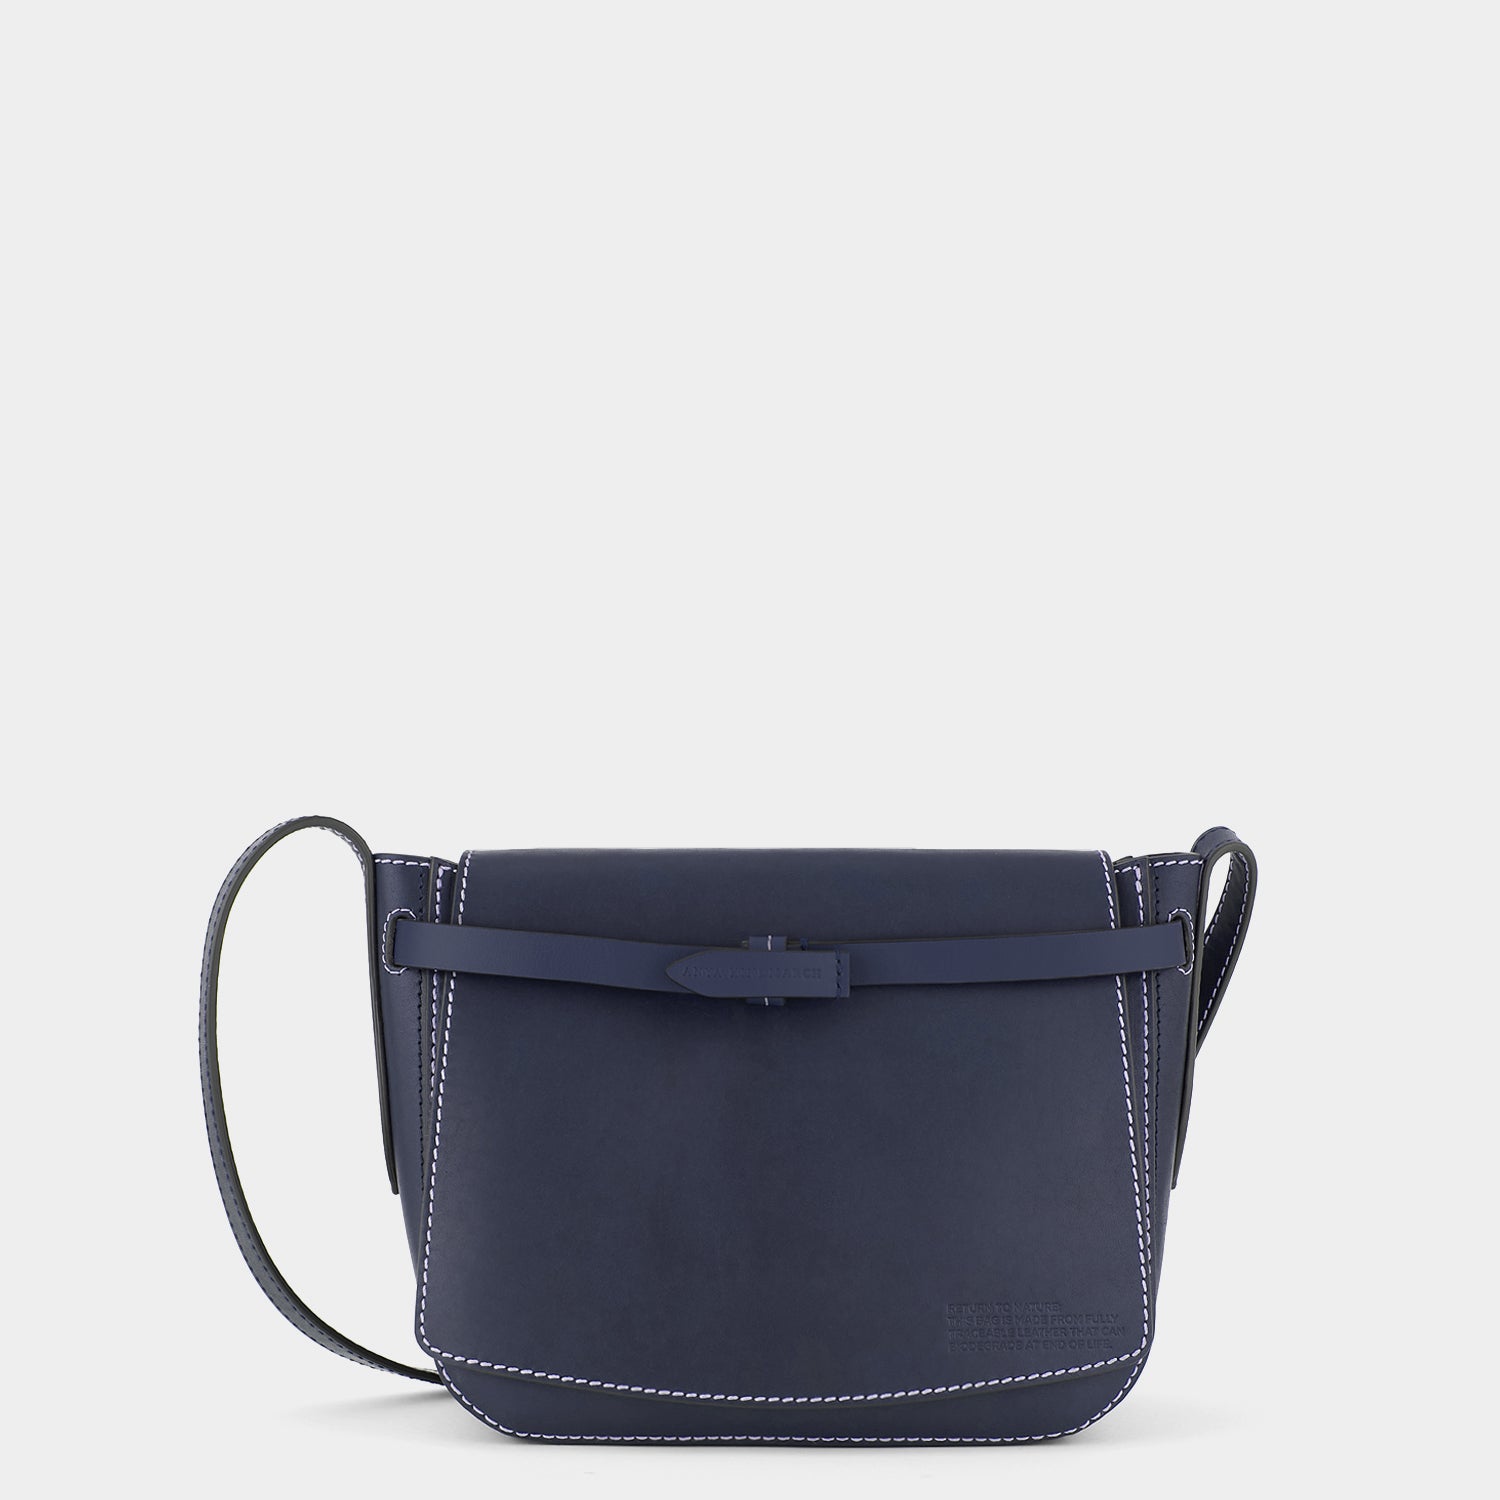 Return to Nature Cross-body -

                  
                    Compostable Leather in Marine -
                  

                  Anya Hindmarch UK
